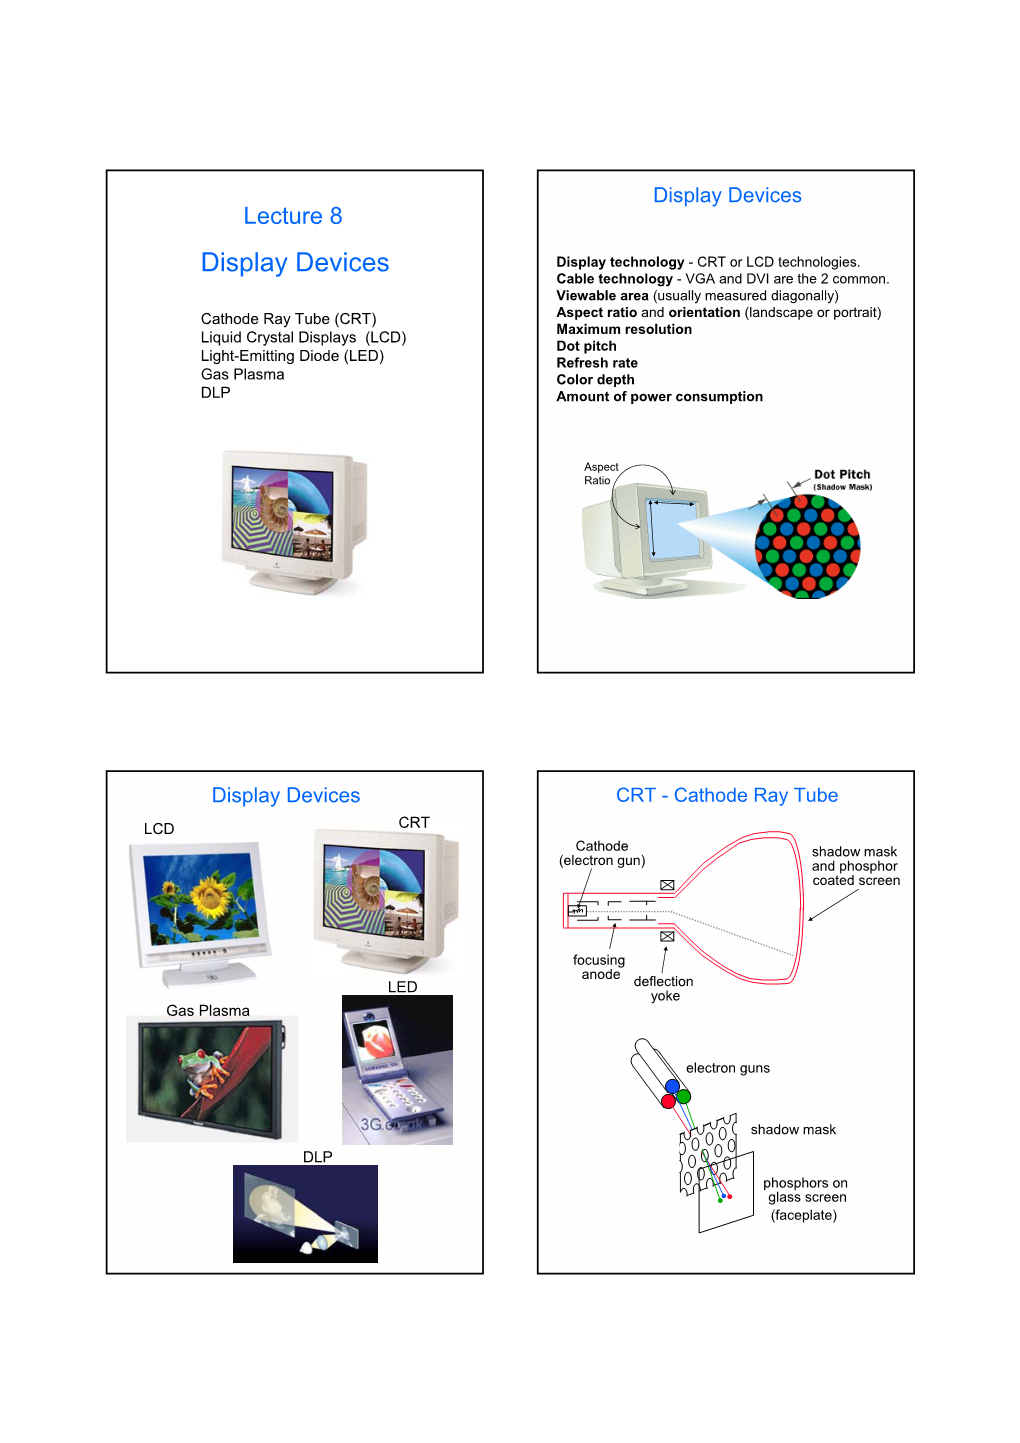 Display Devices Lecture 8